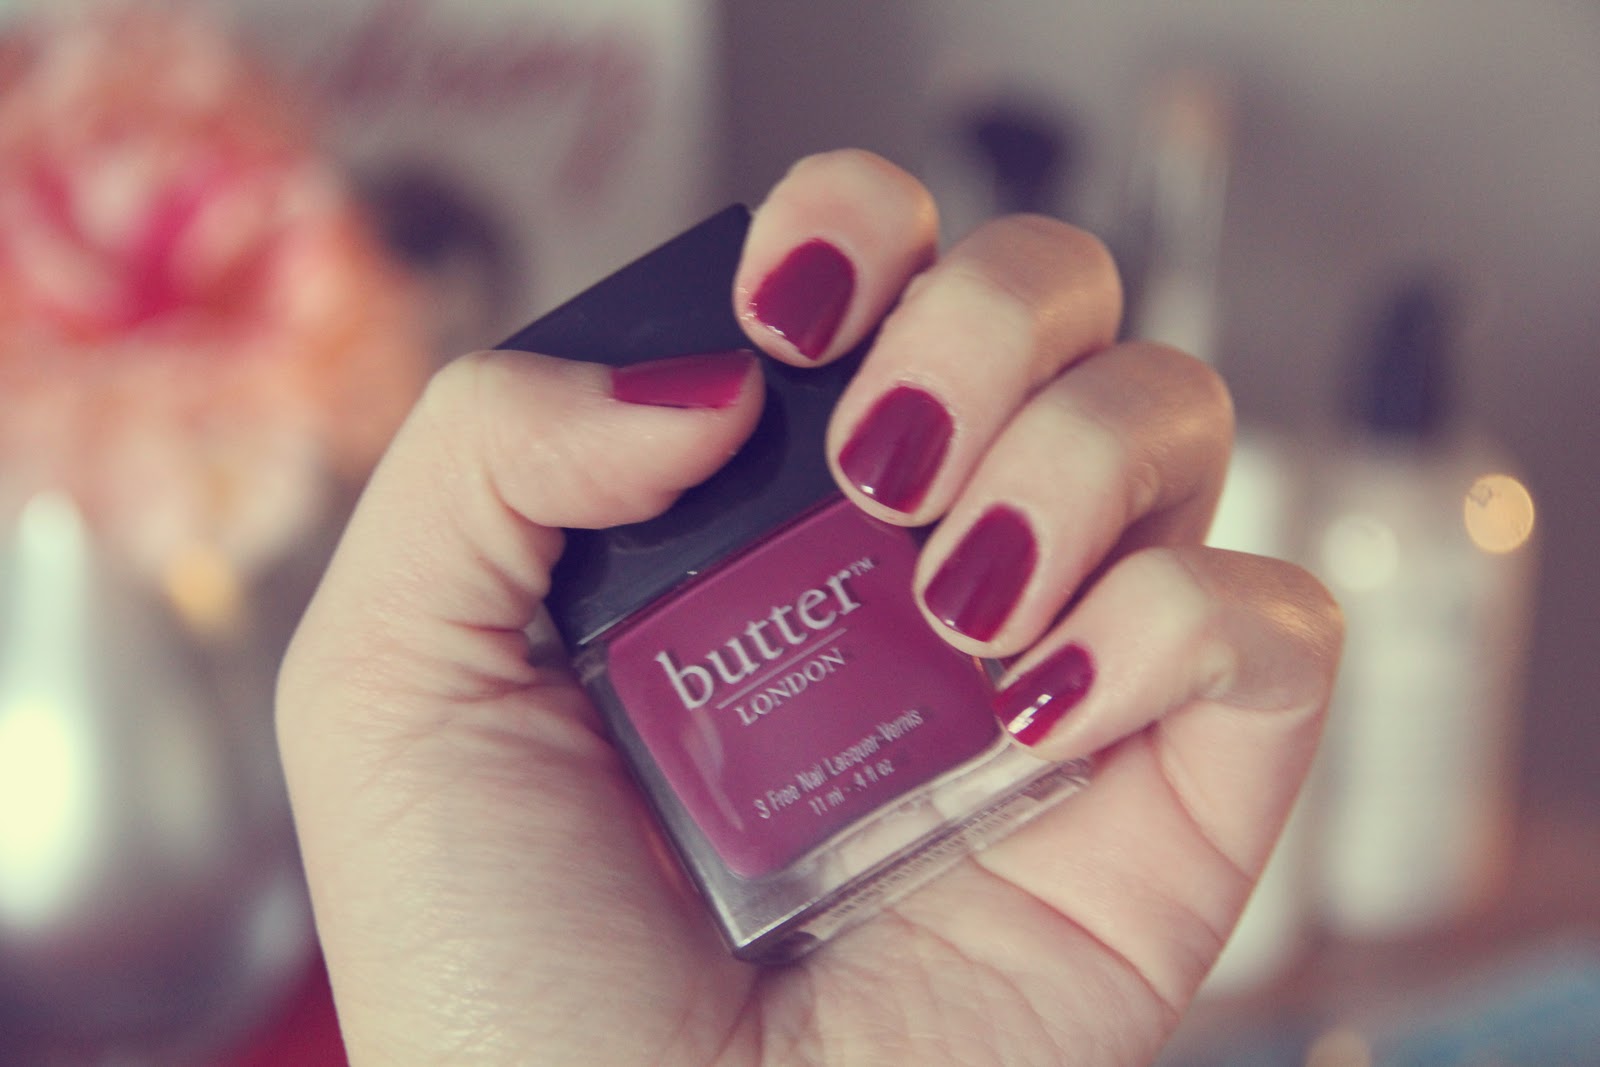 3. Butter London Nail Lacquer in "Queen Vic" - wide 5